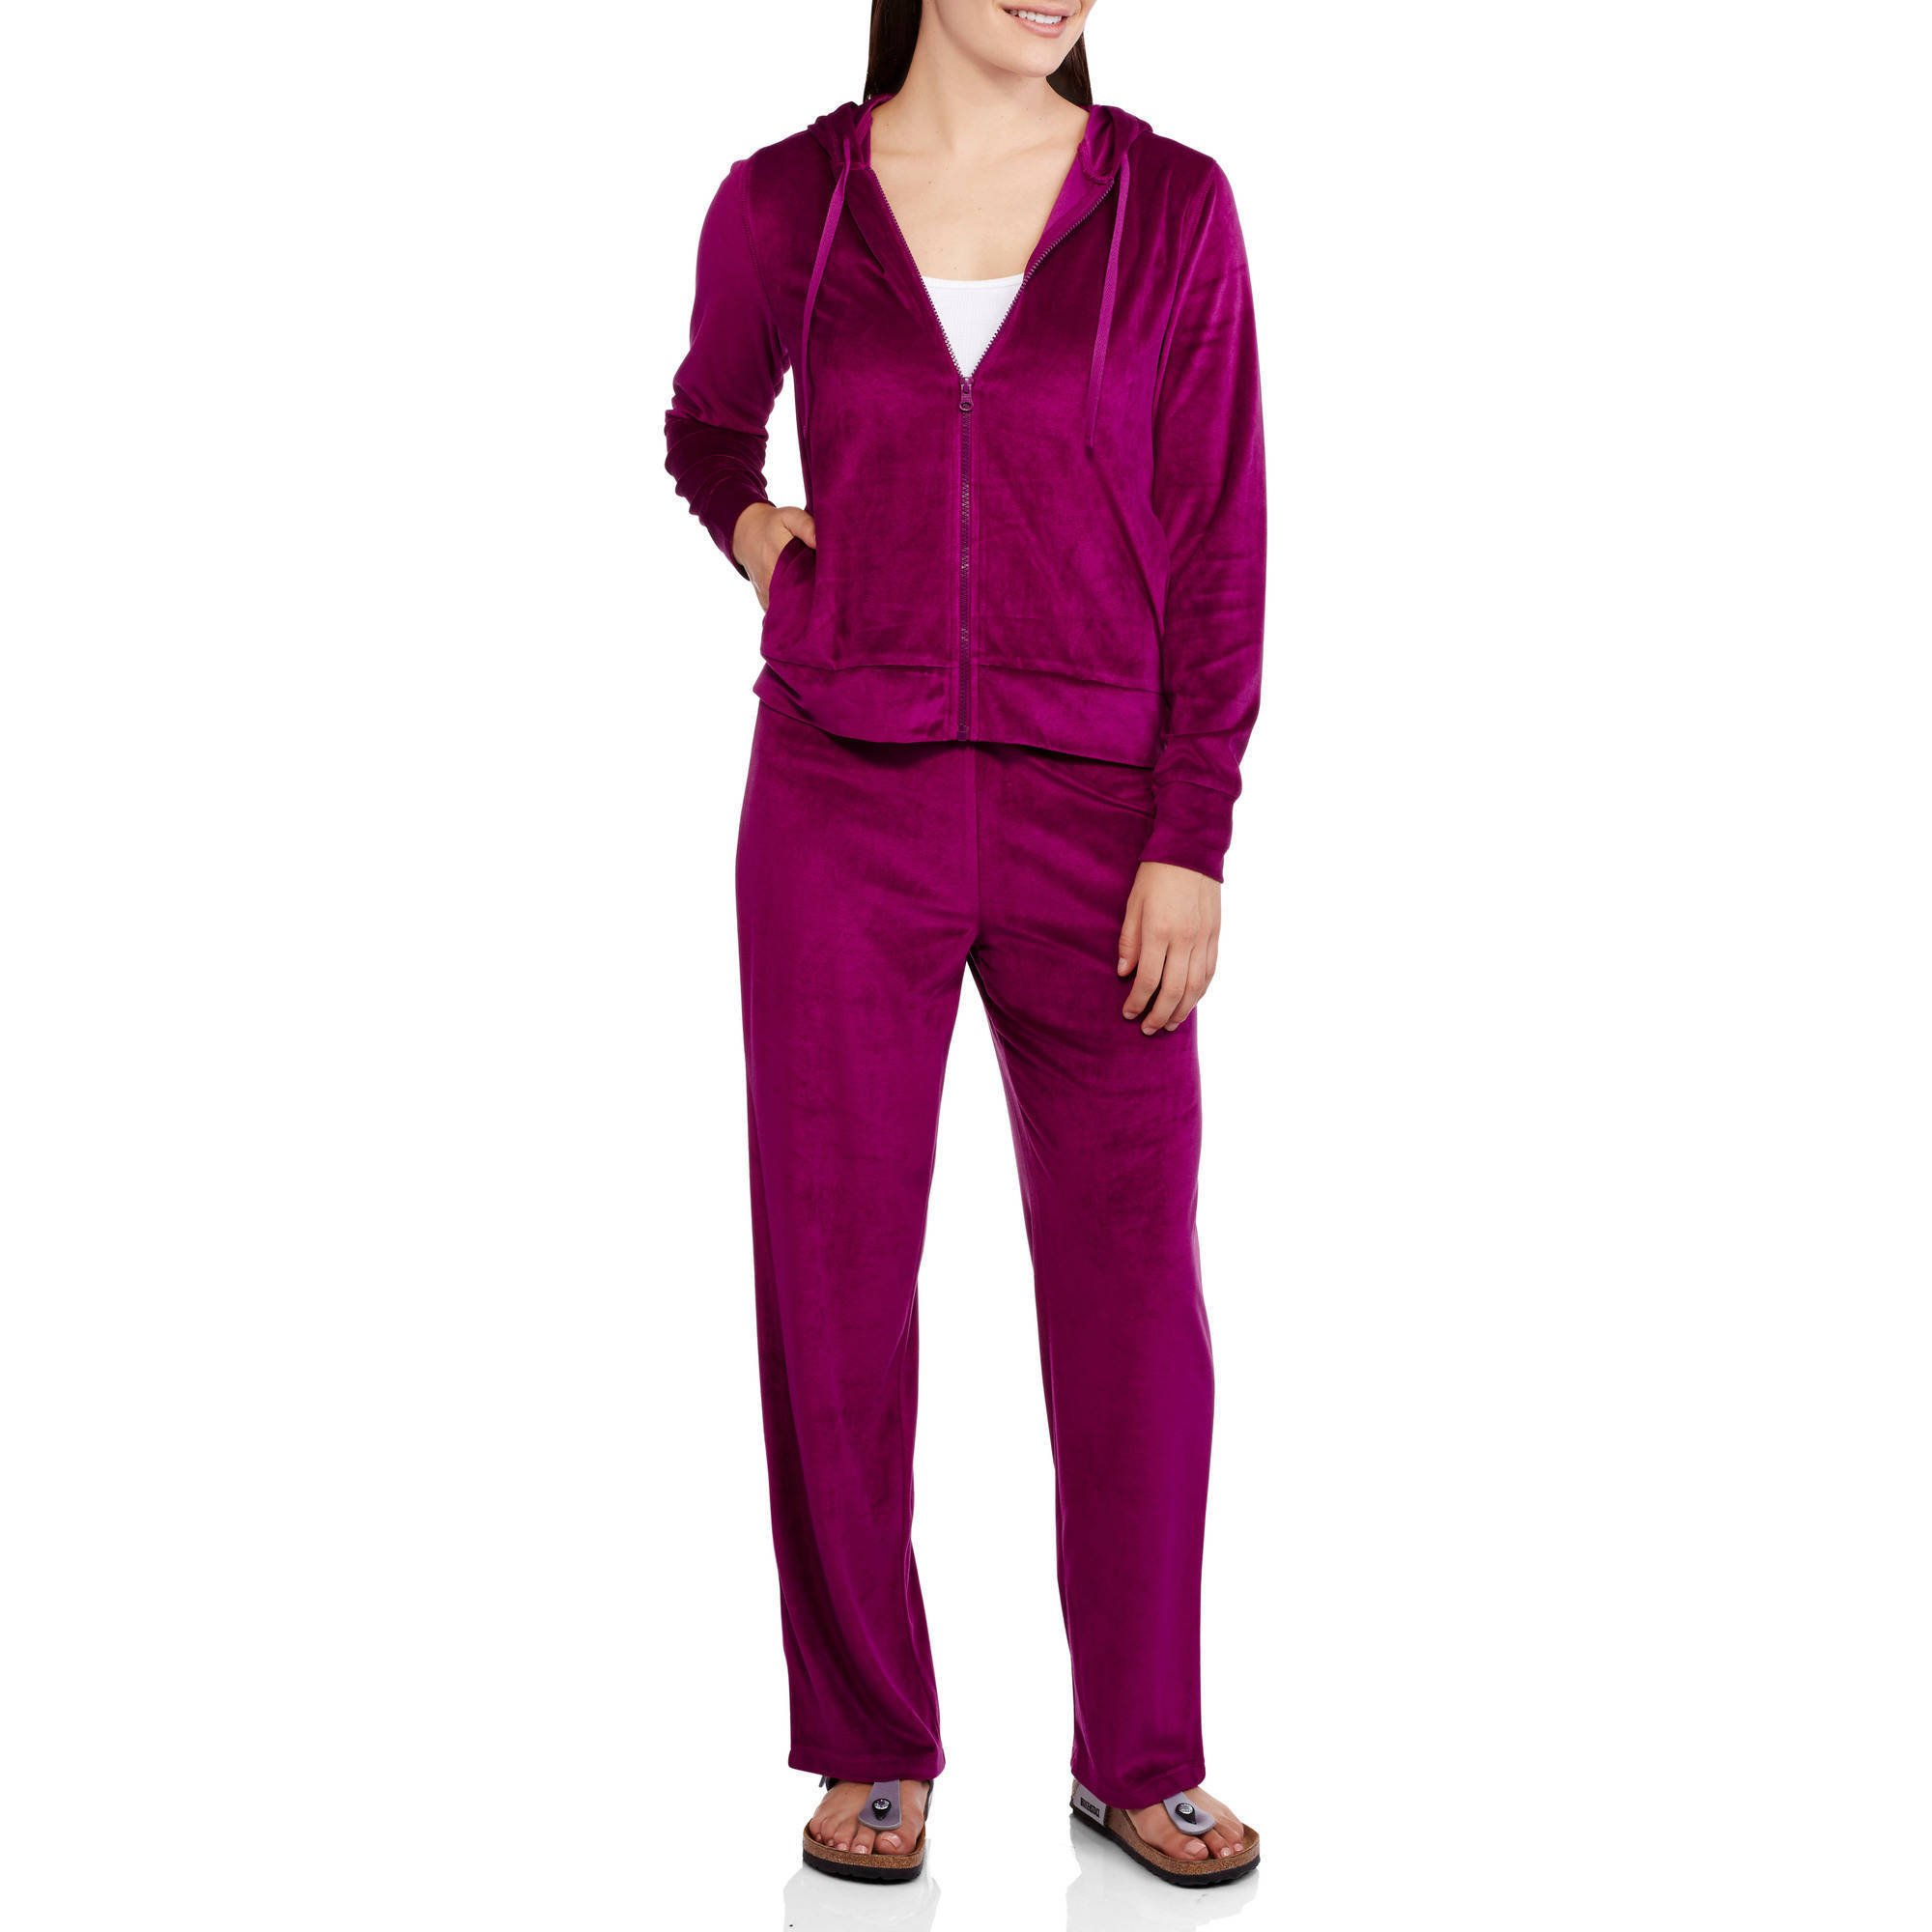 Women's Velour Tracksuit Set with Hoodie - image 1 of 2